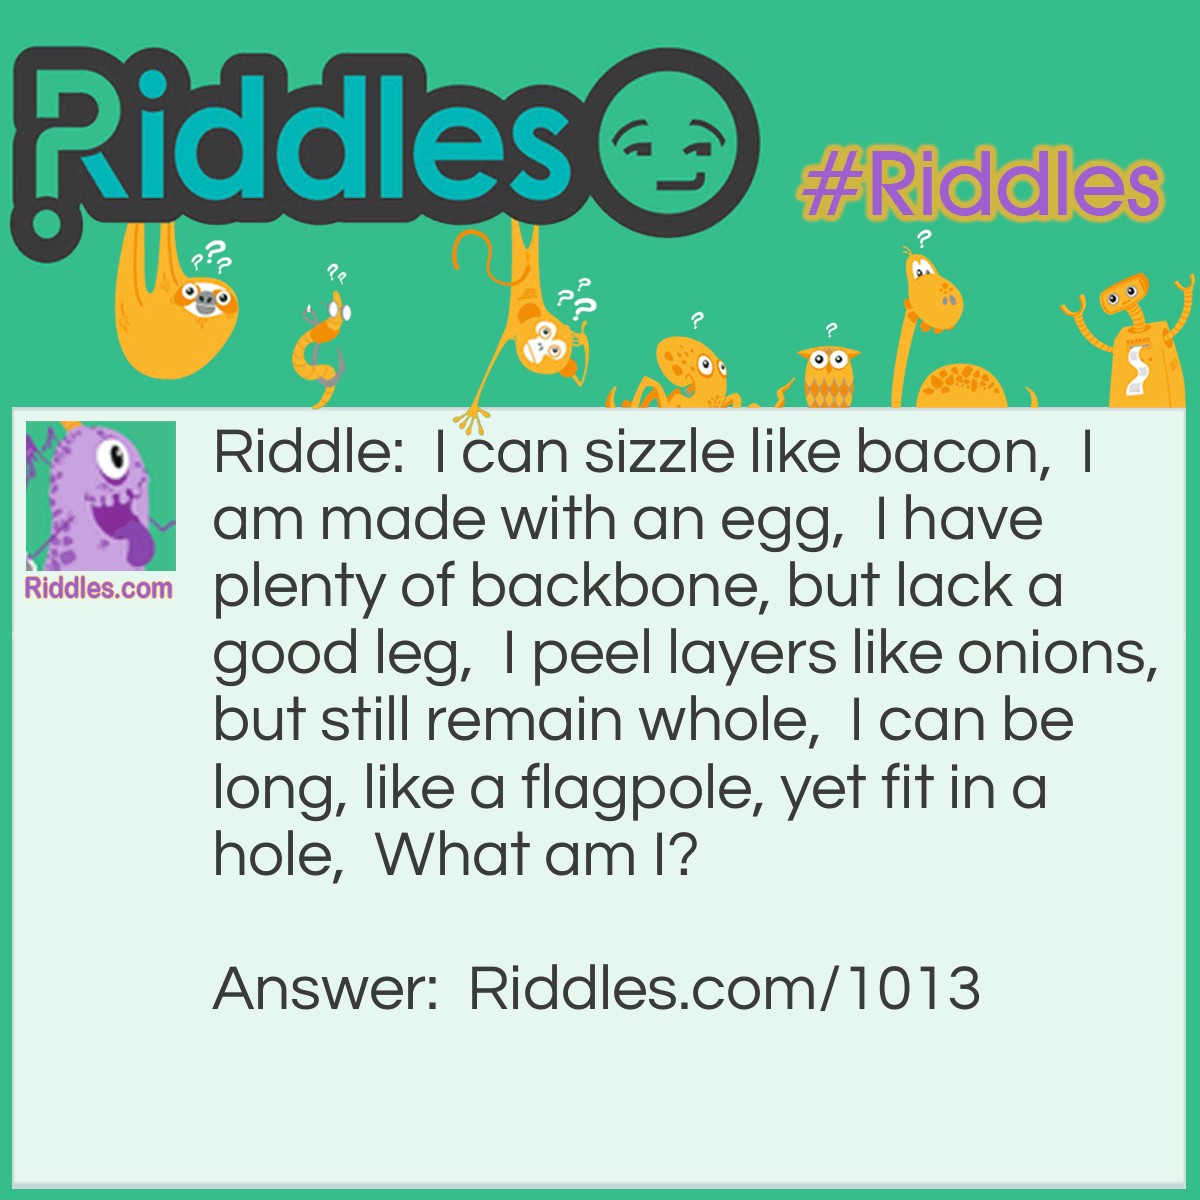 Riddle: I can sizzle like bacon,  I am made with an egg,  I have plenty of backbone, but lack a good leg,  I peel layers like onions, but still remain whole,  I can be long, like a flagpole, yet fit in a hole,  What am I? Answer: A snake.